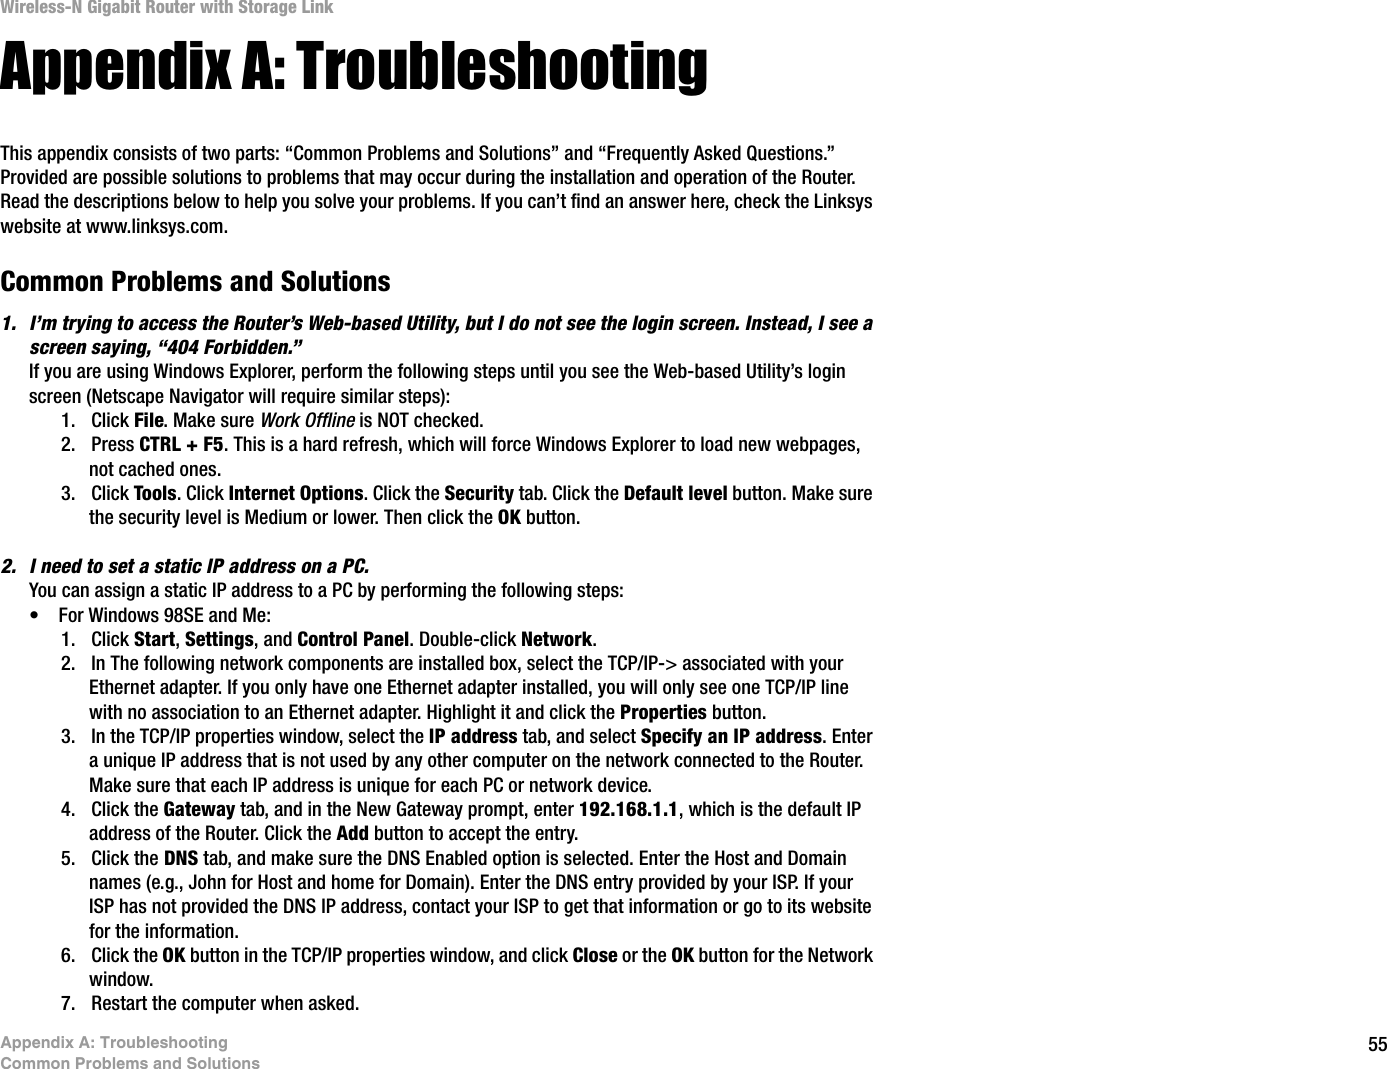 55Appendix A: TroubleshootingCommon Problems and SolutionsWireless-N Gigabit Router with Storage LinkAppendix A: TroubleshootingThis appendix consists of two parts: “Common Problems and Solutions” and “Frequently Asked Questions.” Provided are possible solutions to problems that may occur during the installation and operation of the Router. Read the descriptions below to help you solve your problems. If you can’t find an answer here, check the Linksys website at www.linksys.com.Common Problems and Solutions1. I’m trying to access the Router’s Web-based Utility, but I do not see the login screen. Instead, I see a screen saying, “404 Forbidden.”If you are using Windows Explorer, perform the following steps until you see the Web-based Utility’s login screen (Netscape Navigator will require similar steps):1. Click File. Make sure Work Offline is NOT checked.2. Press CTRL + F5. This is a hard refresh, which will force Windows Explorer to load new webpages, not cached ones.3. Click Tools. Click Internet Options. Click the Security tab. Click the Default level button. Make sure the security level is Medium or lower. Then click the OK button.2. I need to set a static IP address on a PC.You can assign a static IP address to a PC by performing the following steps:• For Windows 98SE and Me:1. Click Start,Settings, and Control Panel. Double-click Network.2. In The following network components are installed box, select the TCP/IP-&gt; associated with your Ethernet adapter. If you only have one Ethernet adapter installed, you will only see one TCP/IP line with no association to an Ethernet adapter. Highlight it and click the Properties button.3. In the TCP/IP properties window, select the IP address tab, and select Specify an IP address. Enter a unique IP address that is not used by any other computer on the network connected to the Router. Make sure that each IP address is unique for each PC or network device.4. Click the Gateway tab, and in the New Gateway prompt, enter 192.168.1.1, which is the default IP address of the Router. Click the Add button to accept the entry.5. Click the DNS tab, and make sure the DNS Enabled option is selected. Enter the Host and Domain names (e.g., John for Host and home for Domain). Enter the DNS entry provided by your ISP. If your ISP has not provided the DNS IP address, contact your ISP to get that information or go to its website for the information.6. Click the OK button in the TCP/IP properties window, and click Close or the OK button for the Network window.7. Restart the computer when asked.